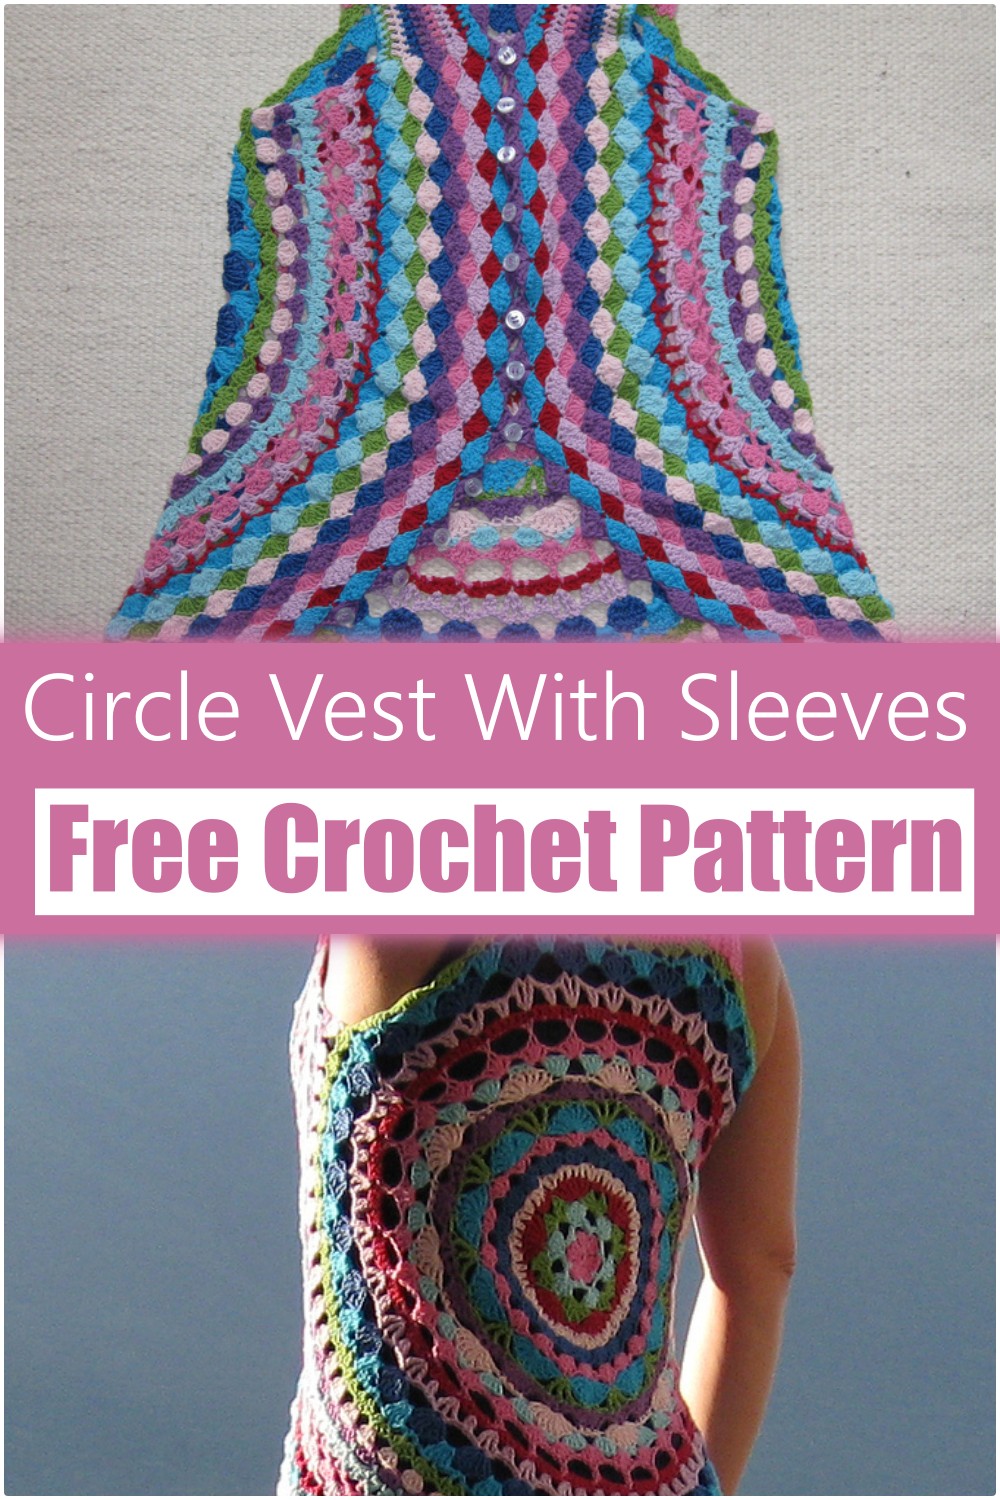 Crochet Circle Vest With Sleeves